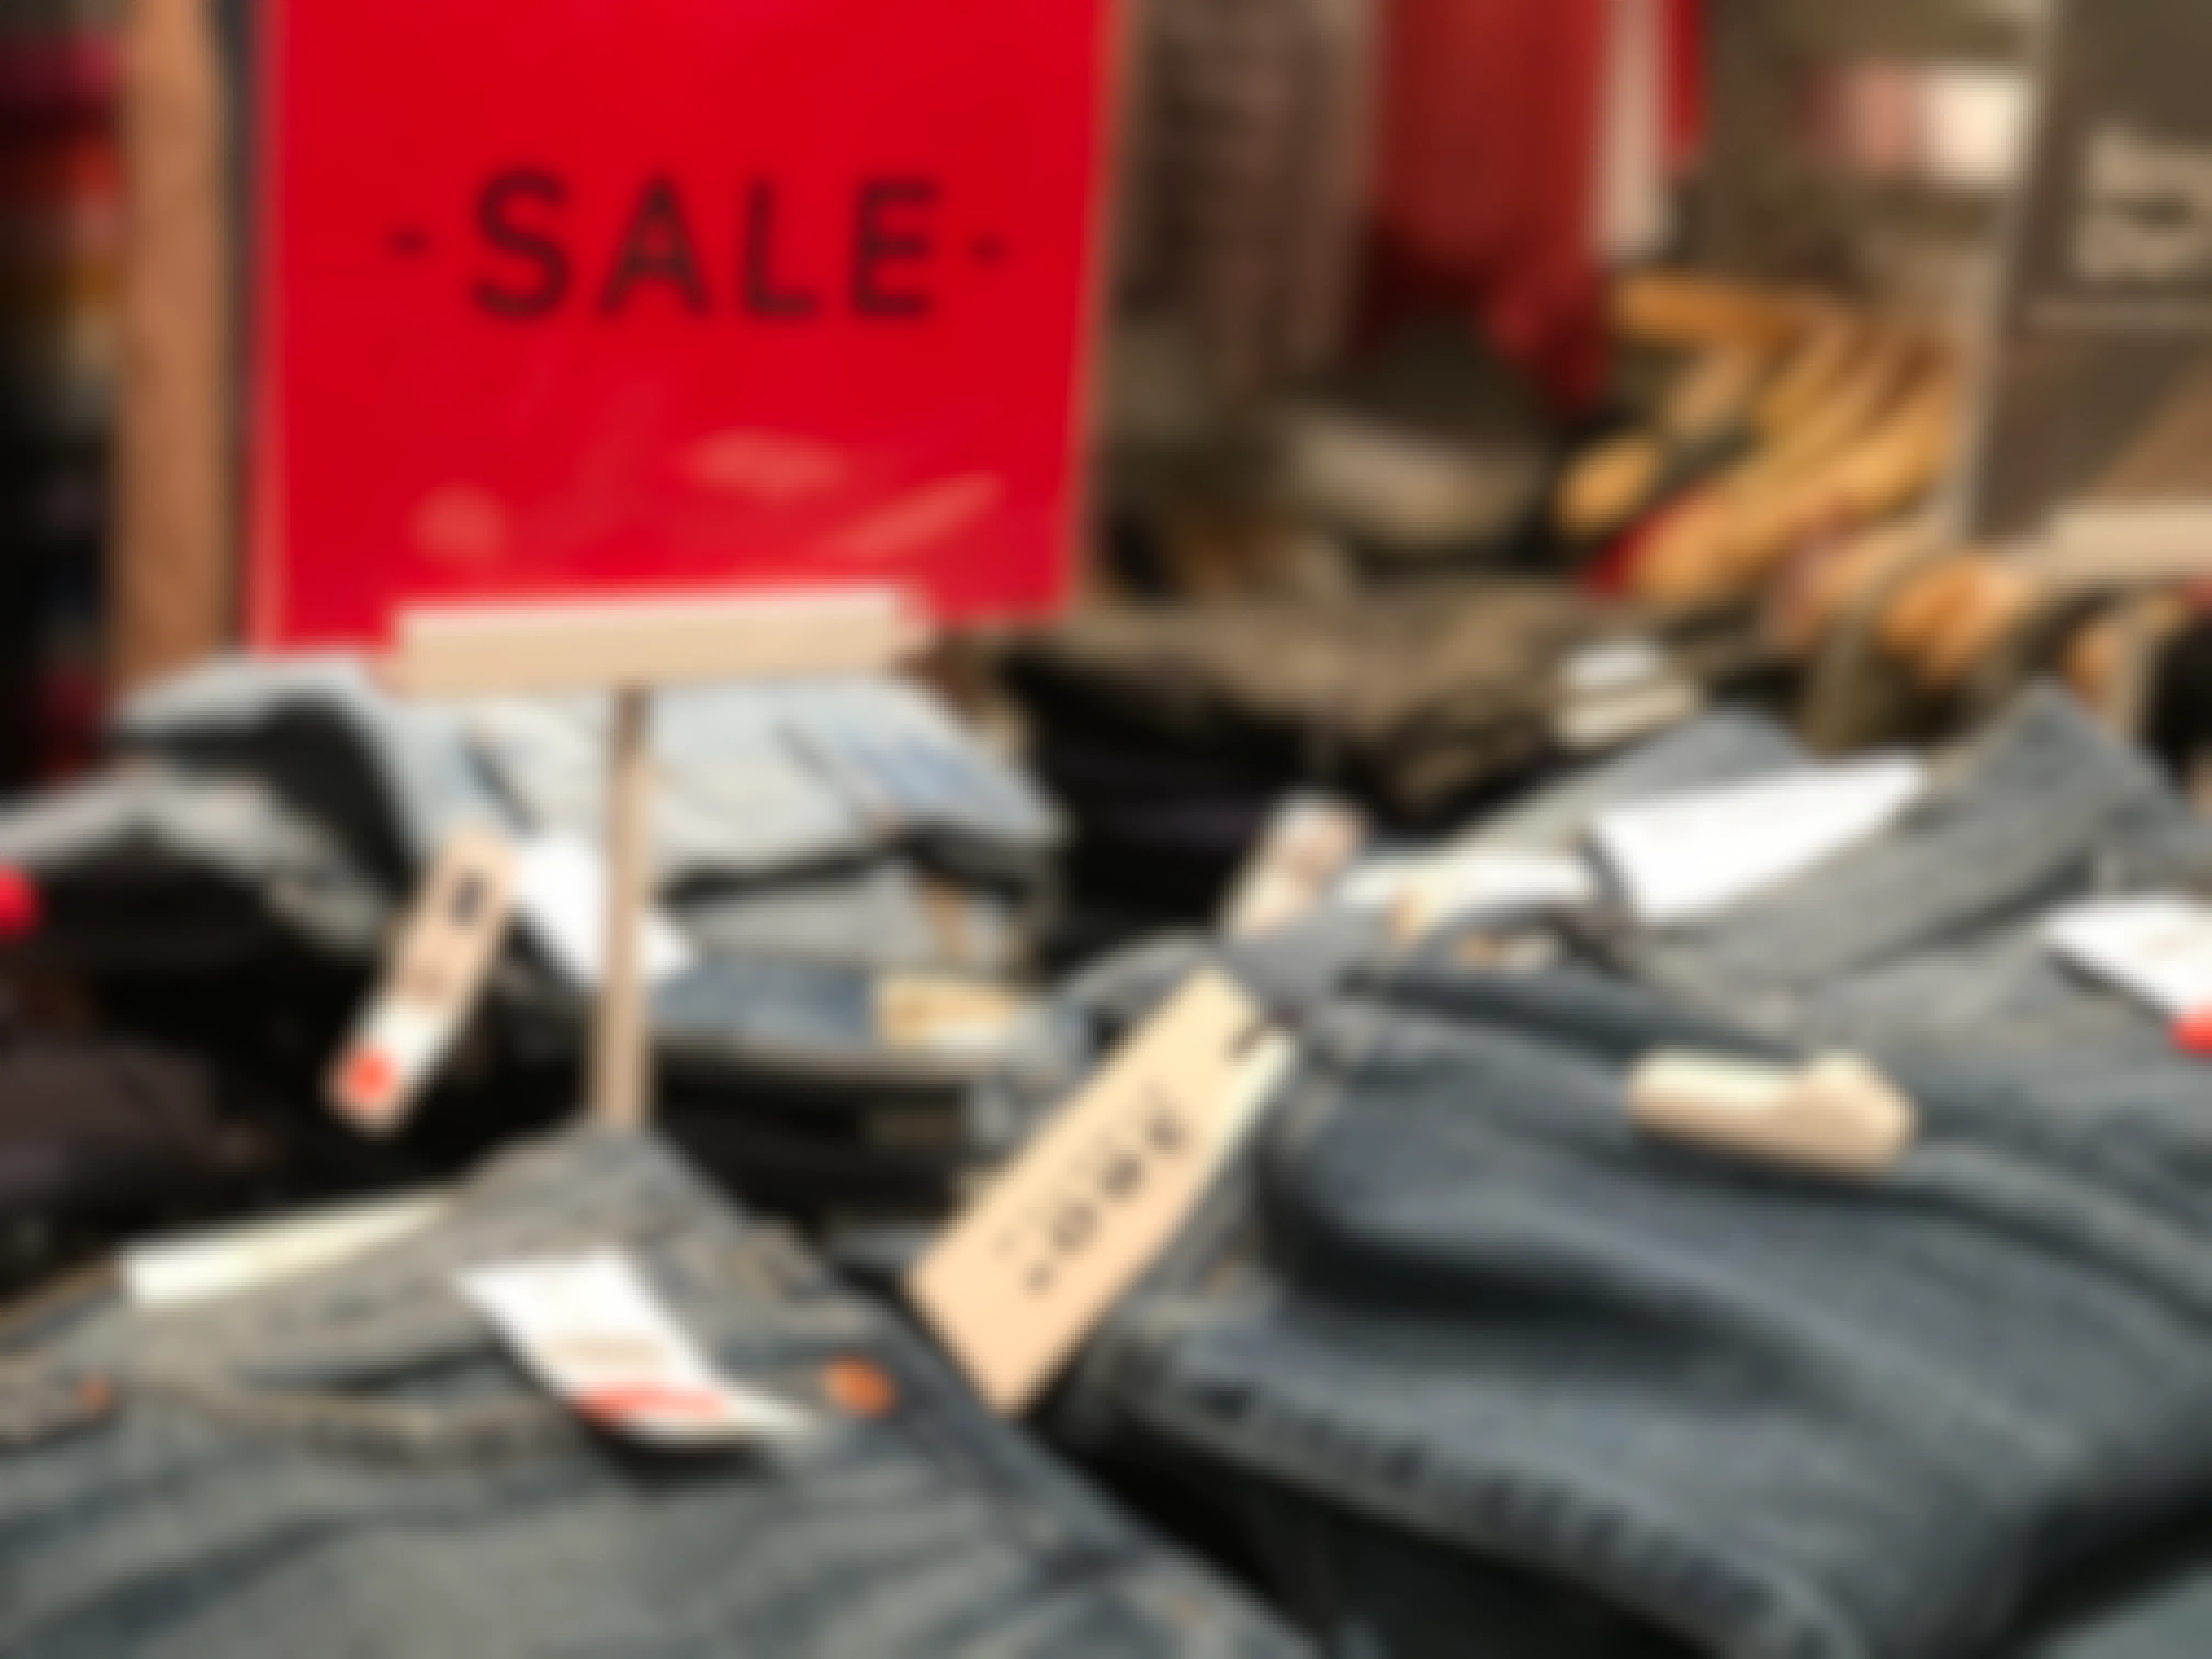 3. Buy Gap jeans in April, July, October and December to save up to 75%.